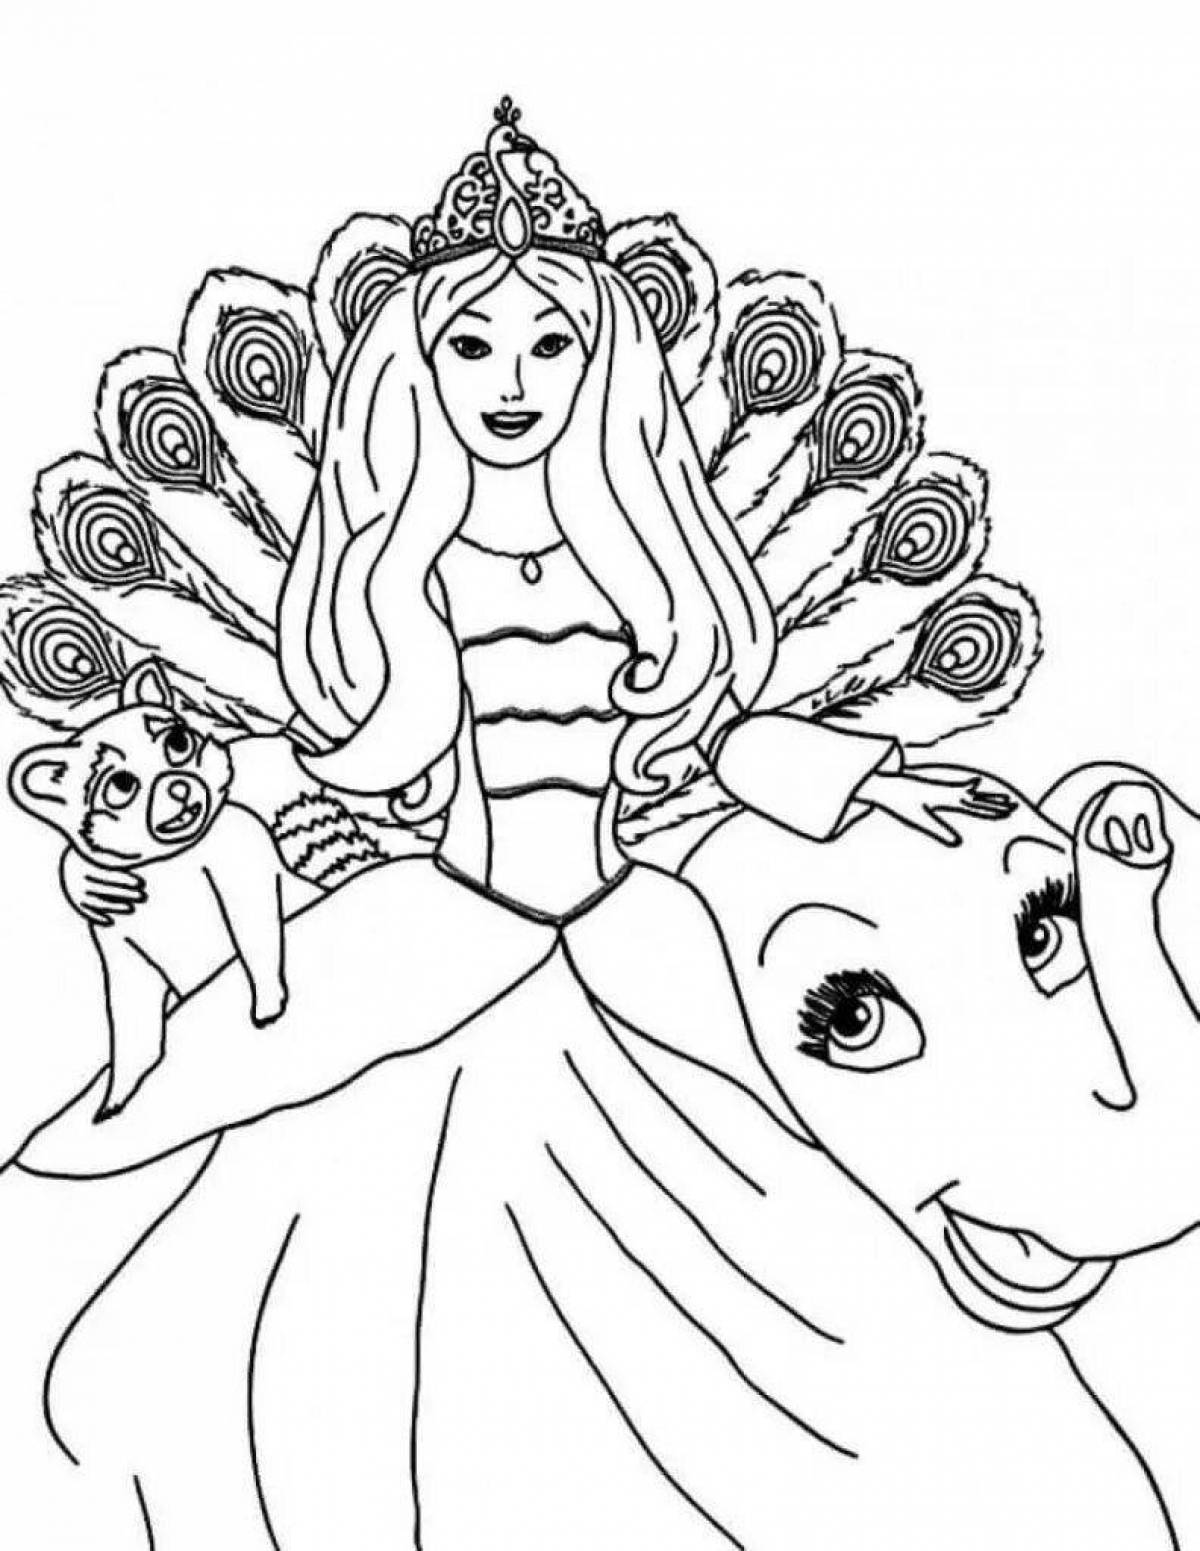 Coloring book shiny queen barbie